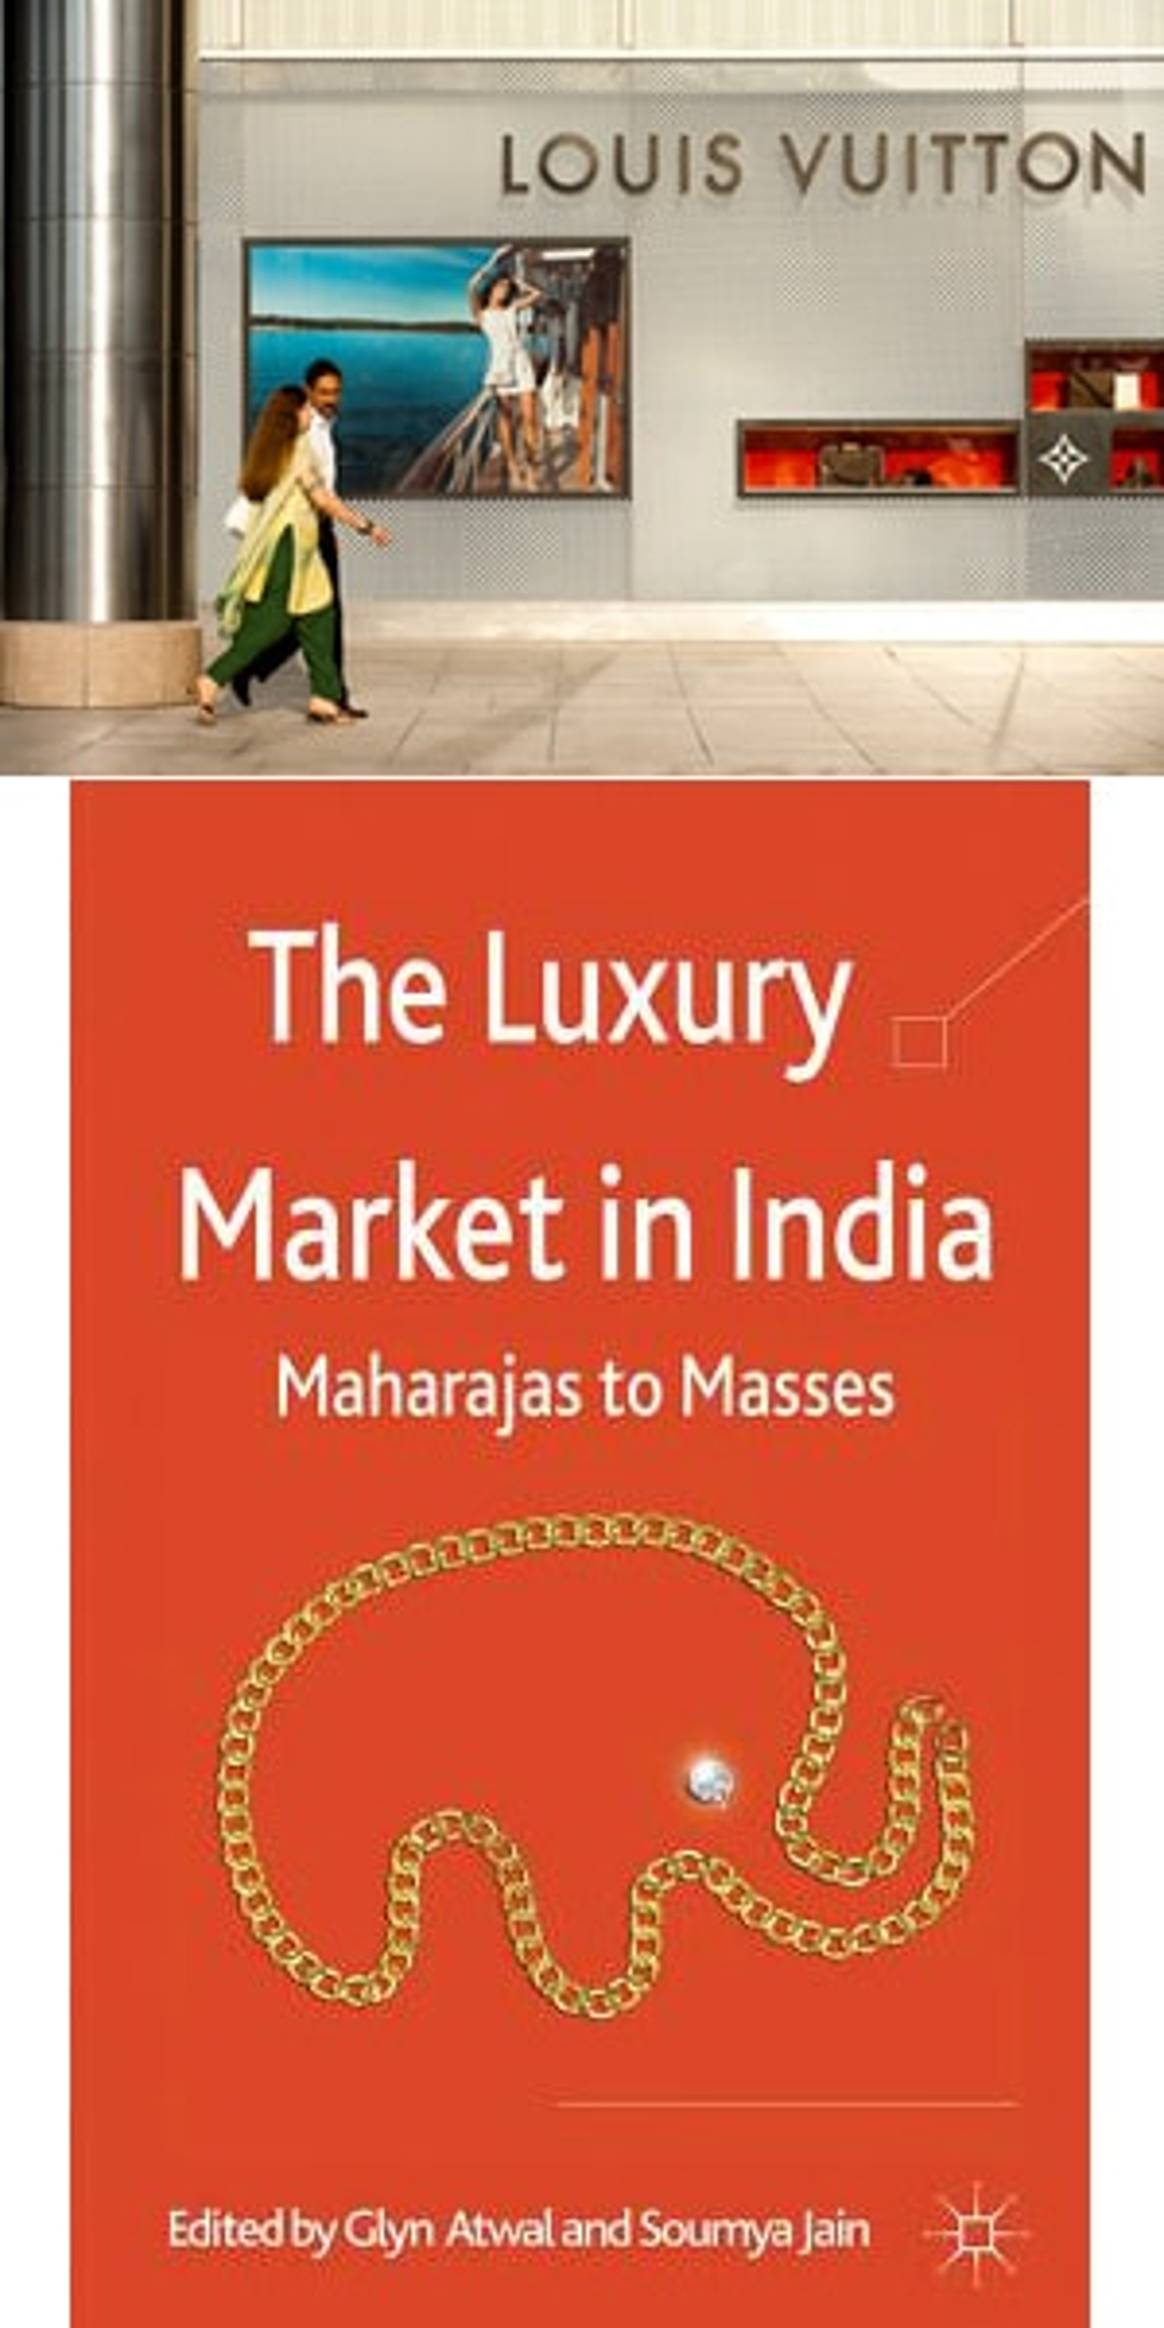 Interview: The Luxury Market in India